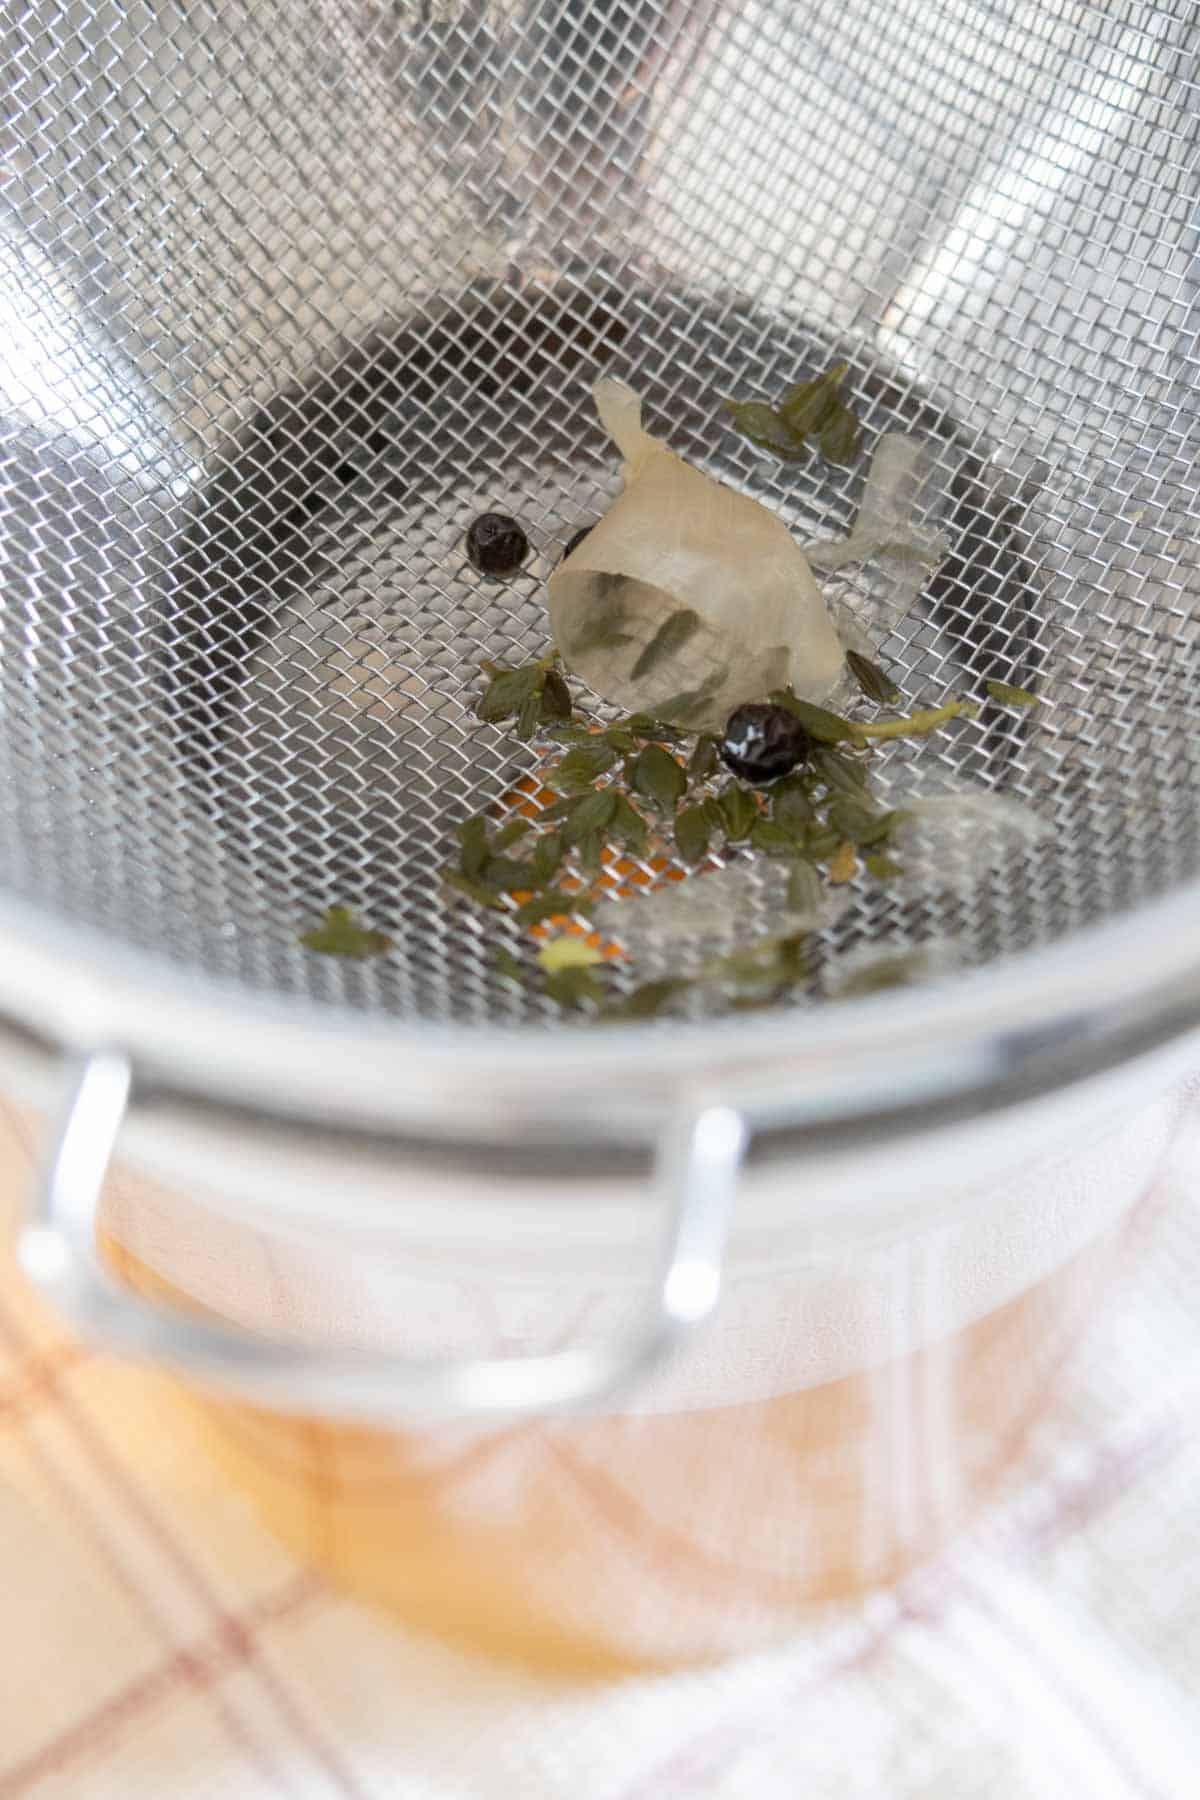 Strainer set over container for straining vegetable stock.